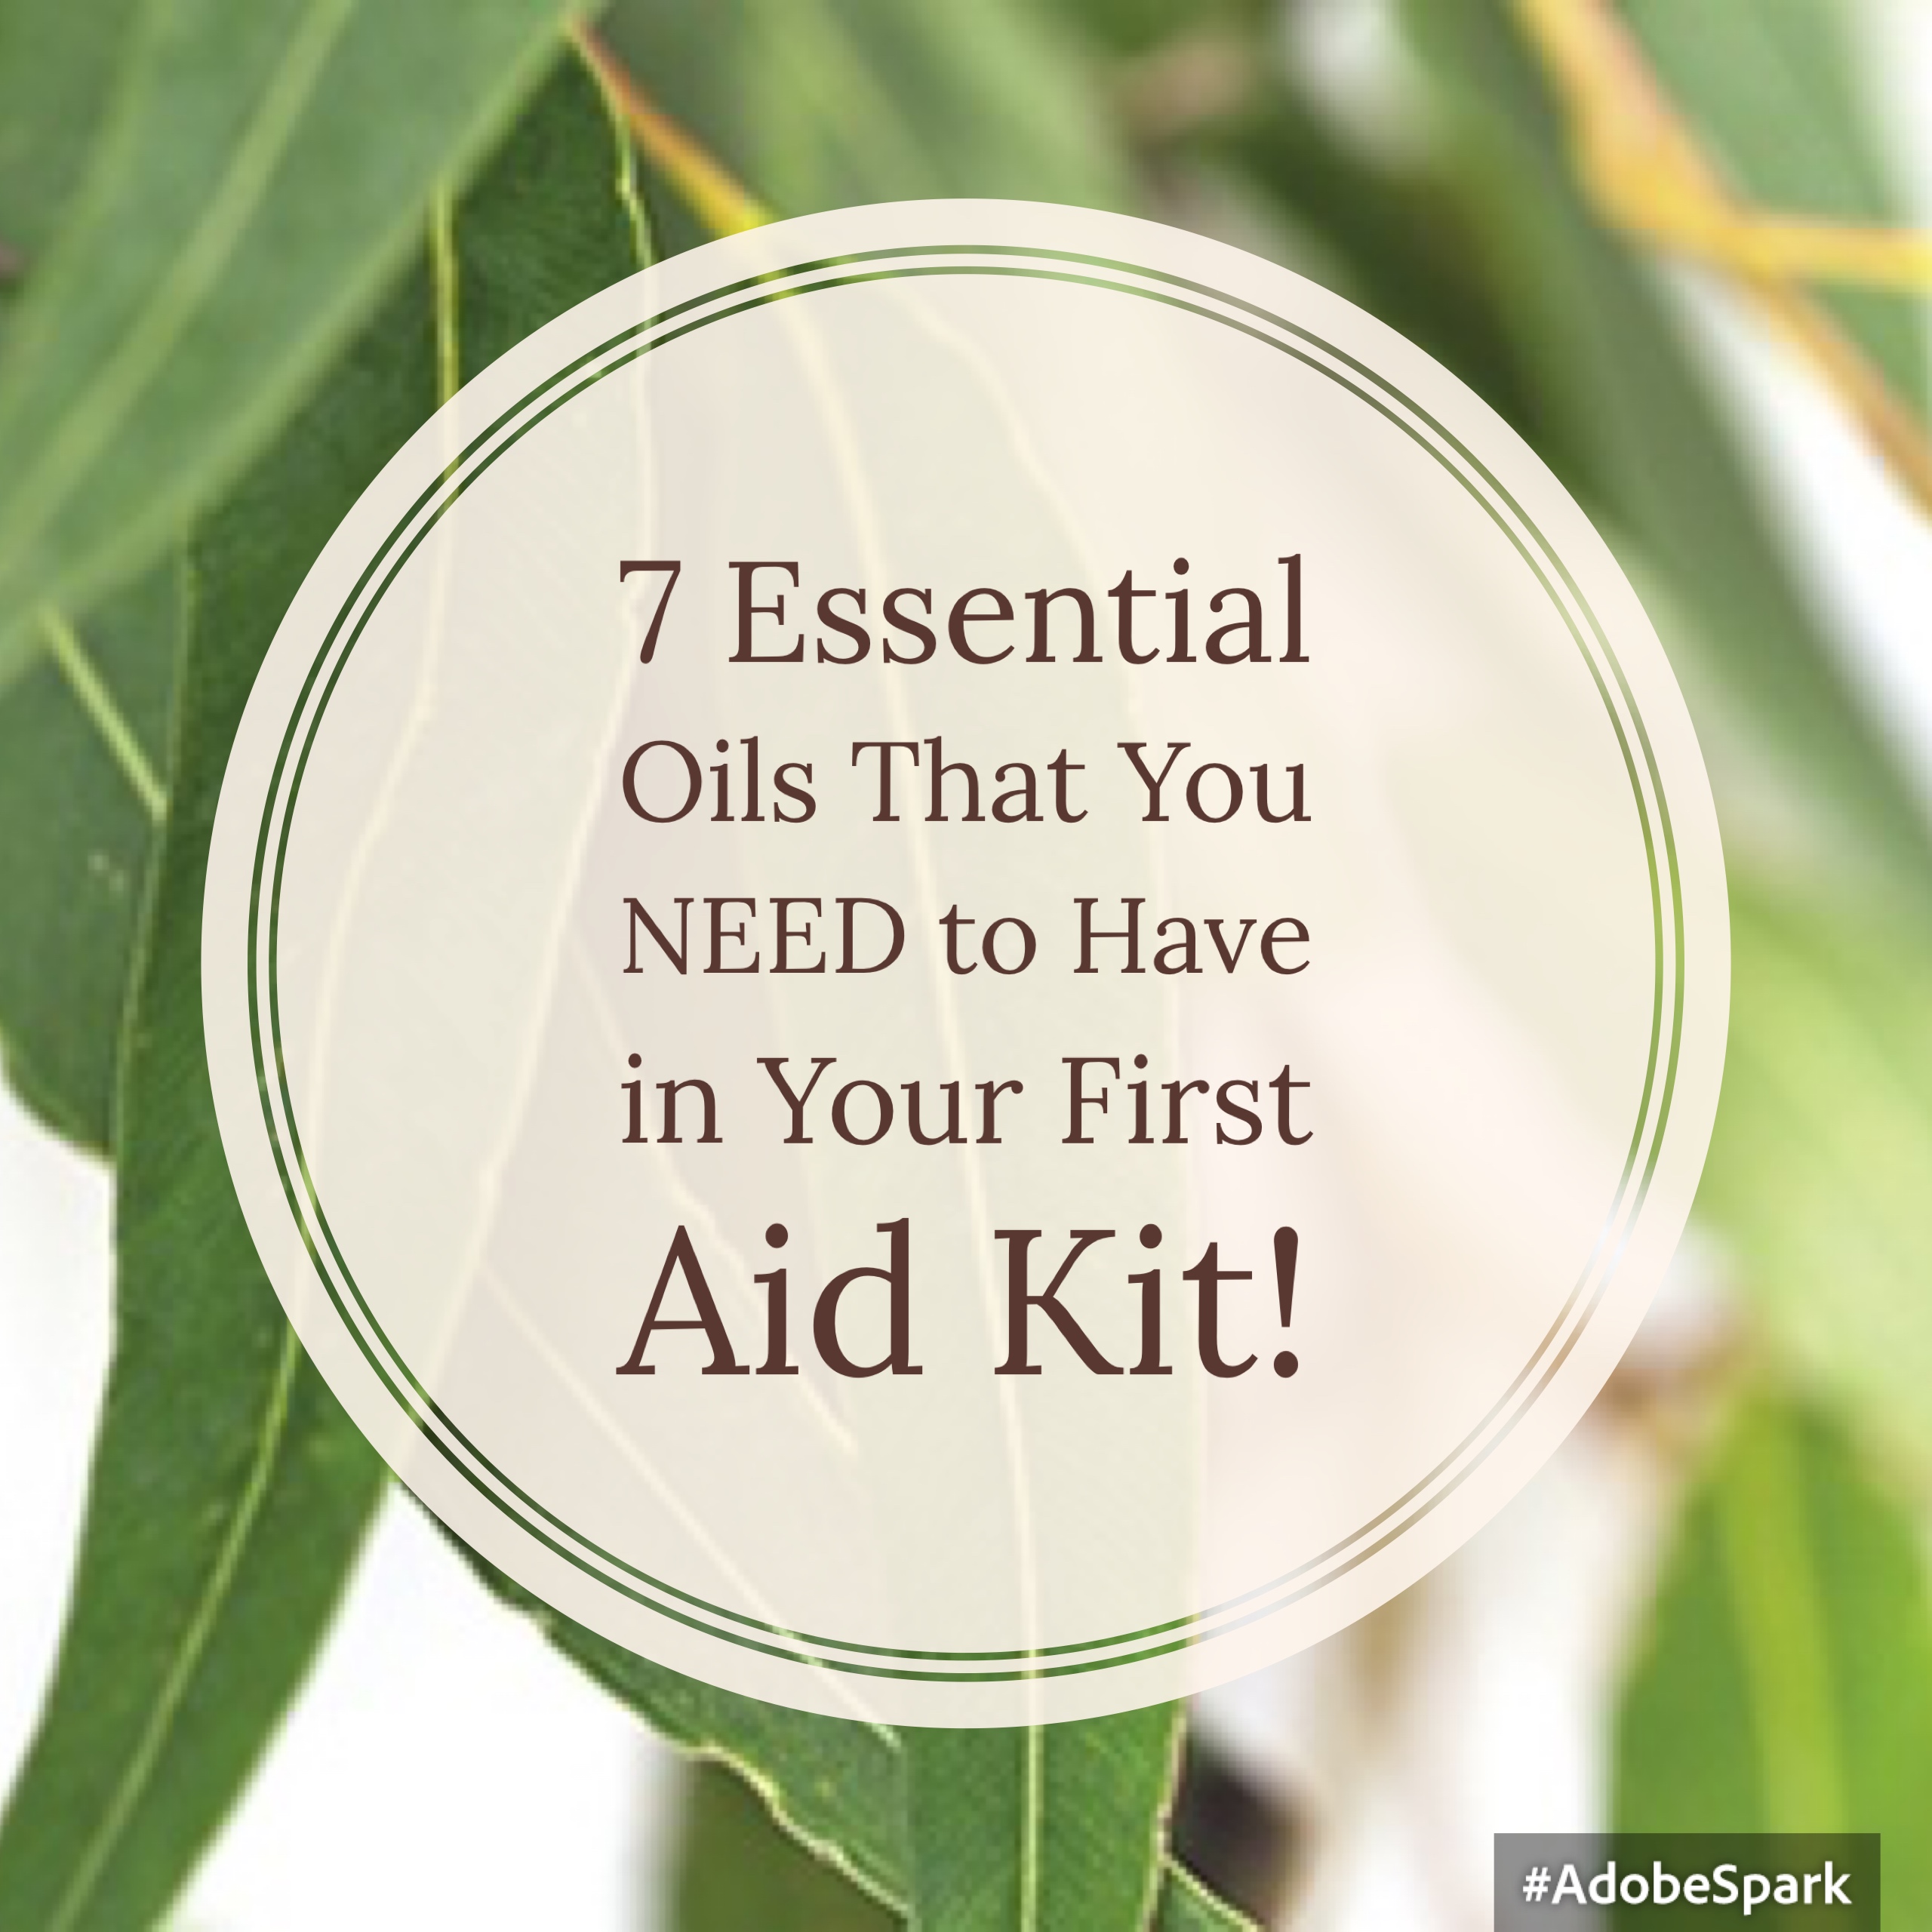 7 Essential Oils That You NEED to Have in Your First Aid Kit